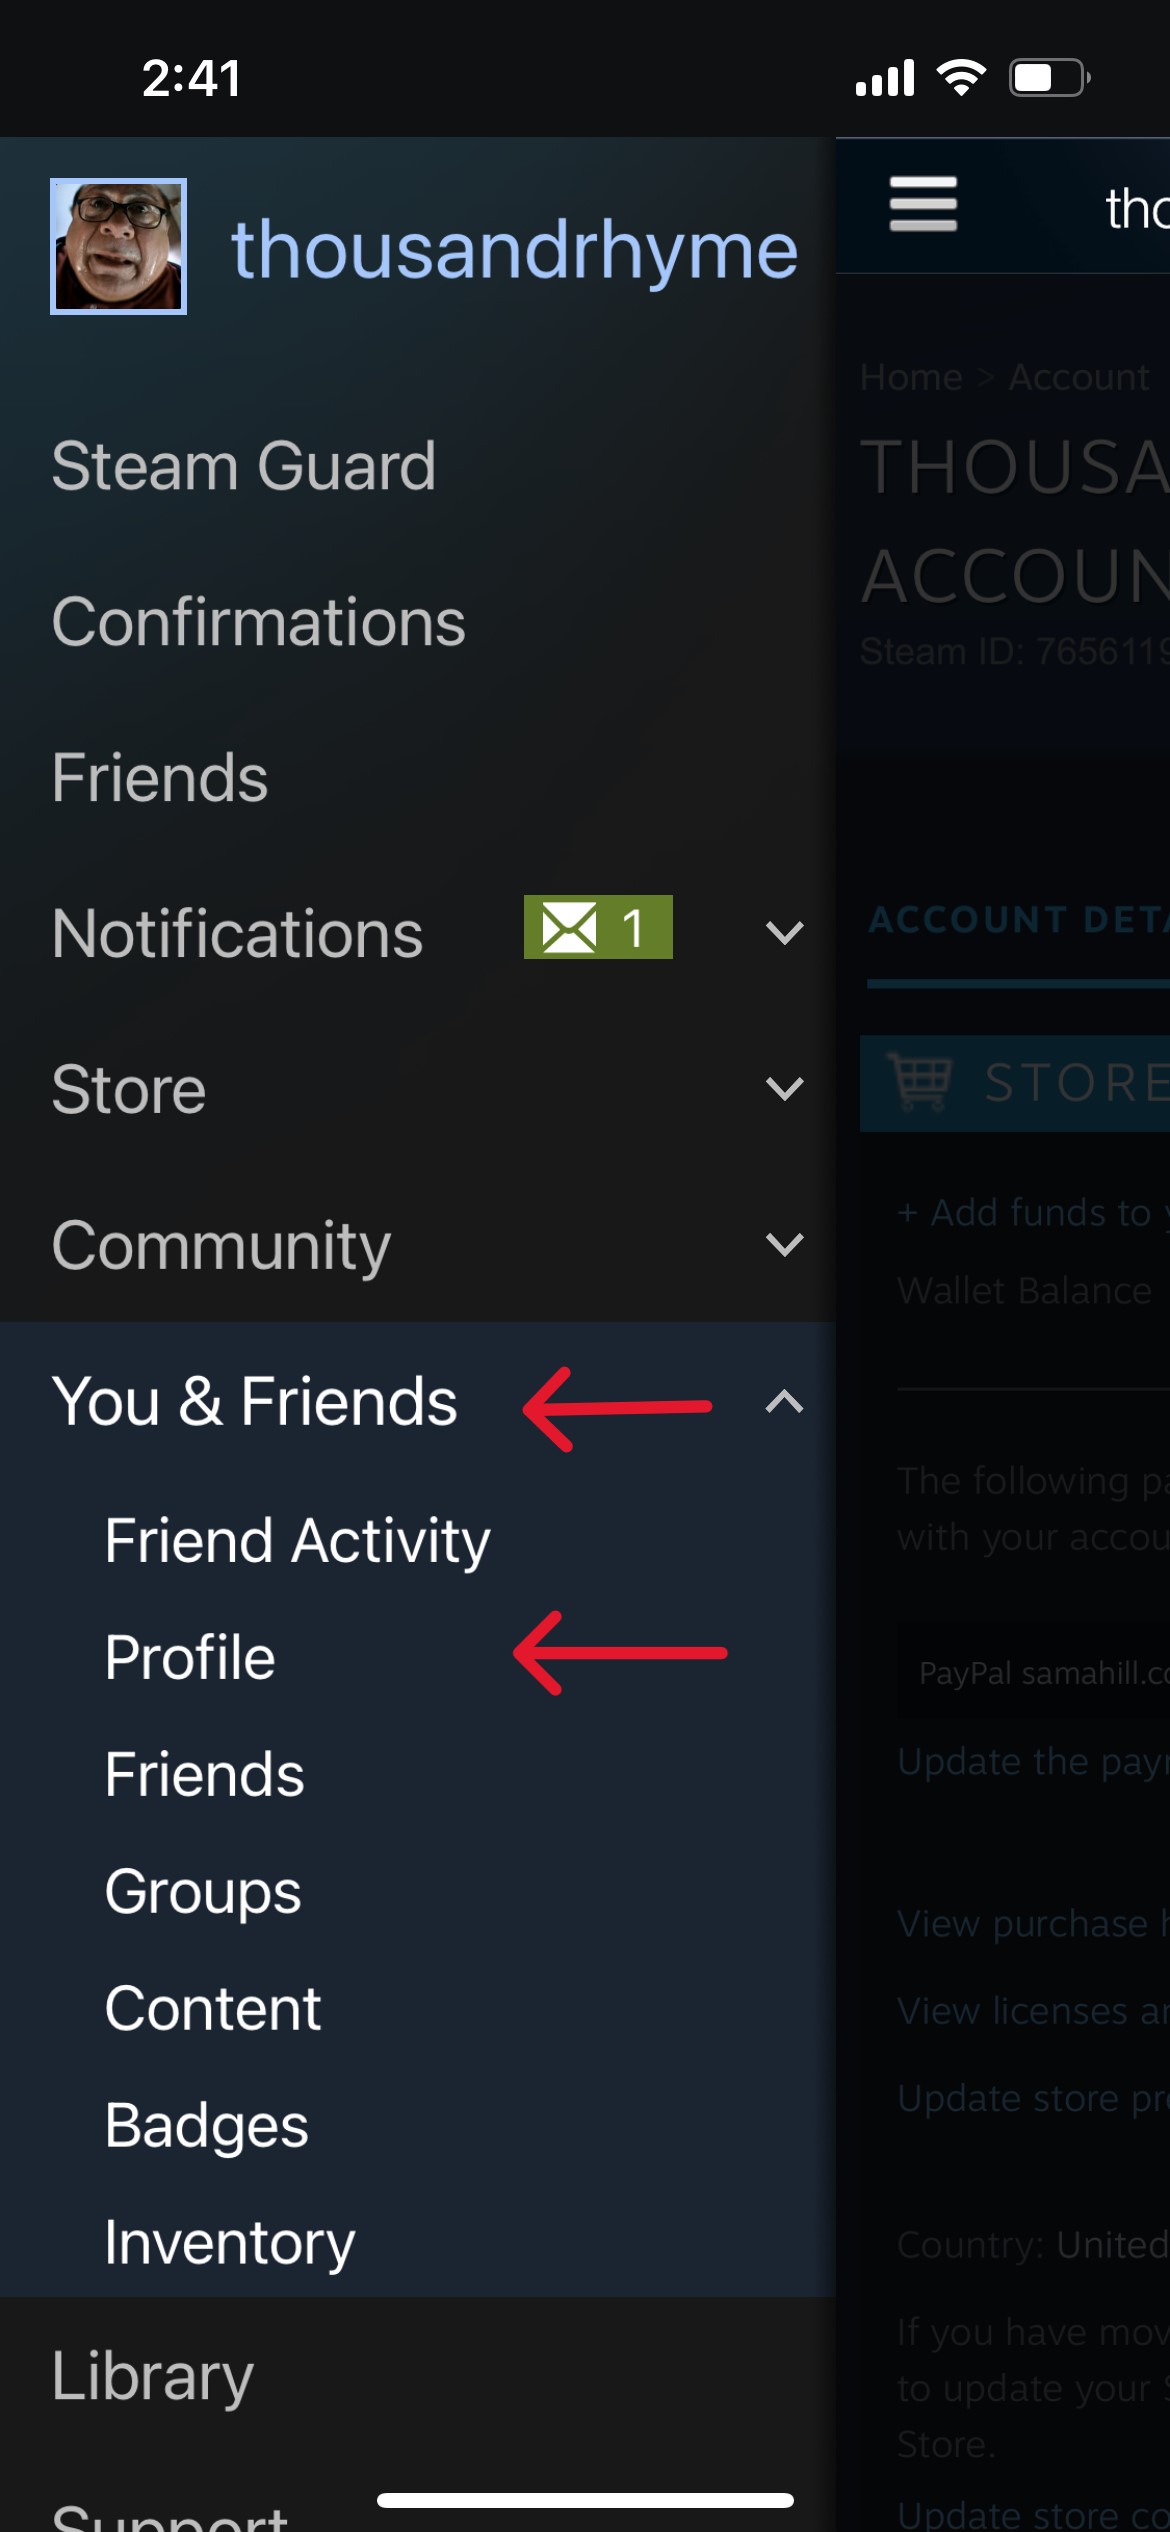 steam - Why does my profile consist of numbers instead of my